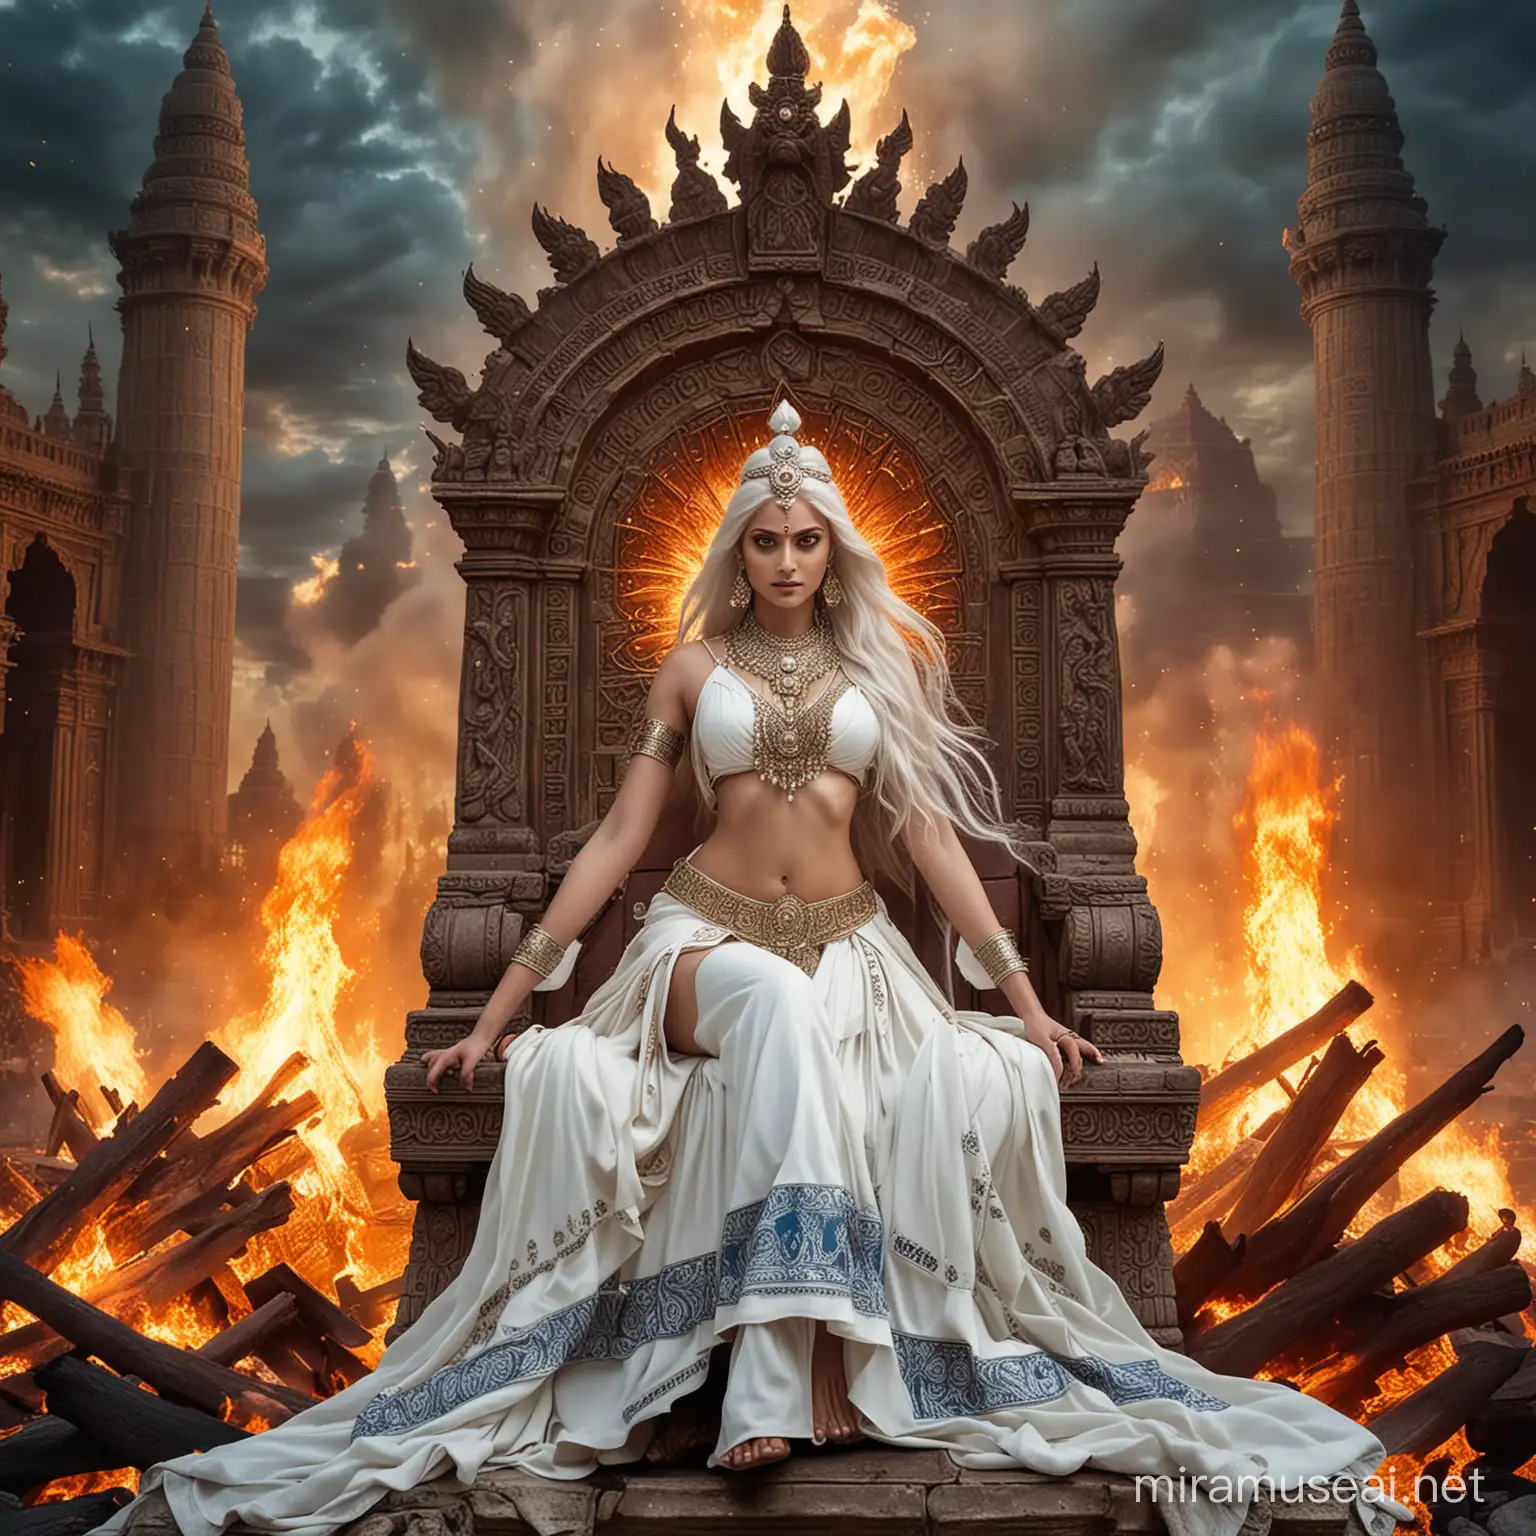 Powerful Hindu Goddess Empress on Majestic Throne Amidst Fire and Gods